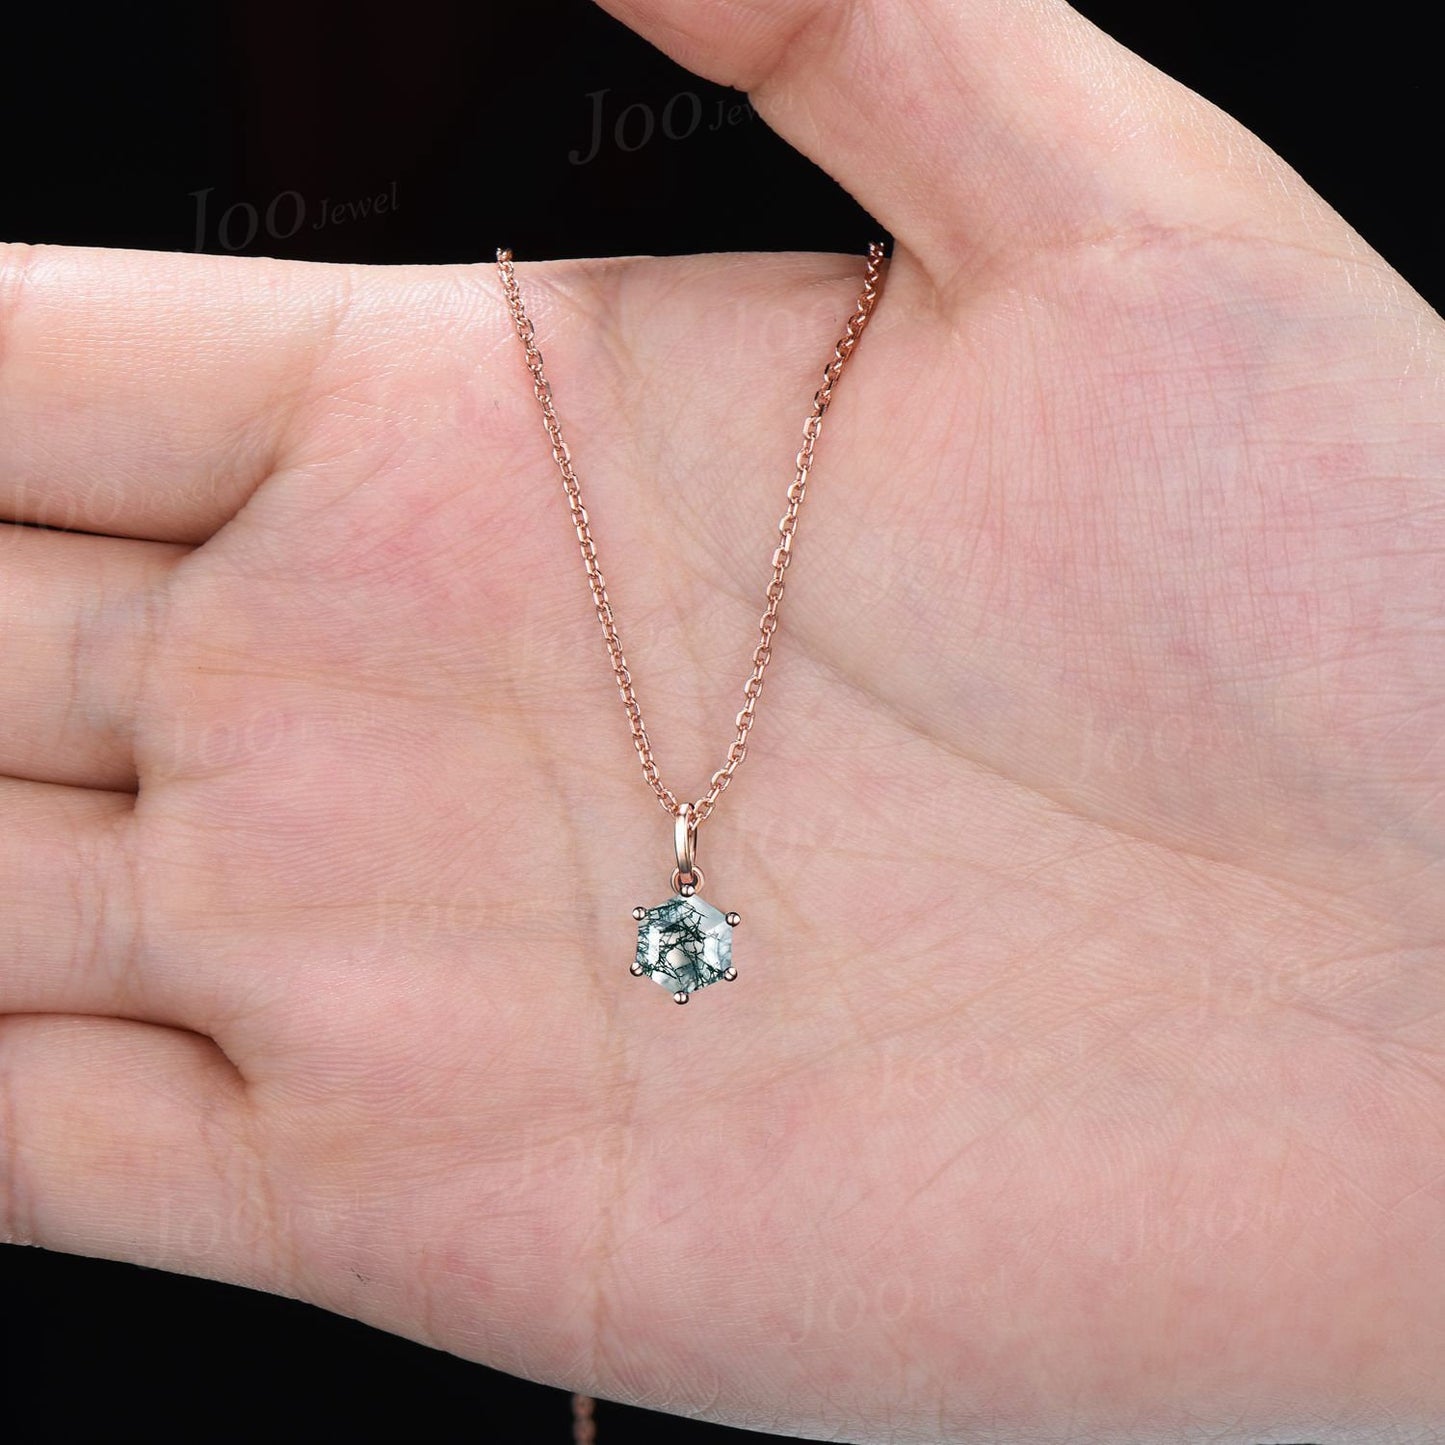 Silver Hexagon Natural Moss Agate Necklace Solid 14k/18k Rose Gold Vintage Personalized Solitaire Wedding Pendant Anniversary Bridal Gifts